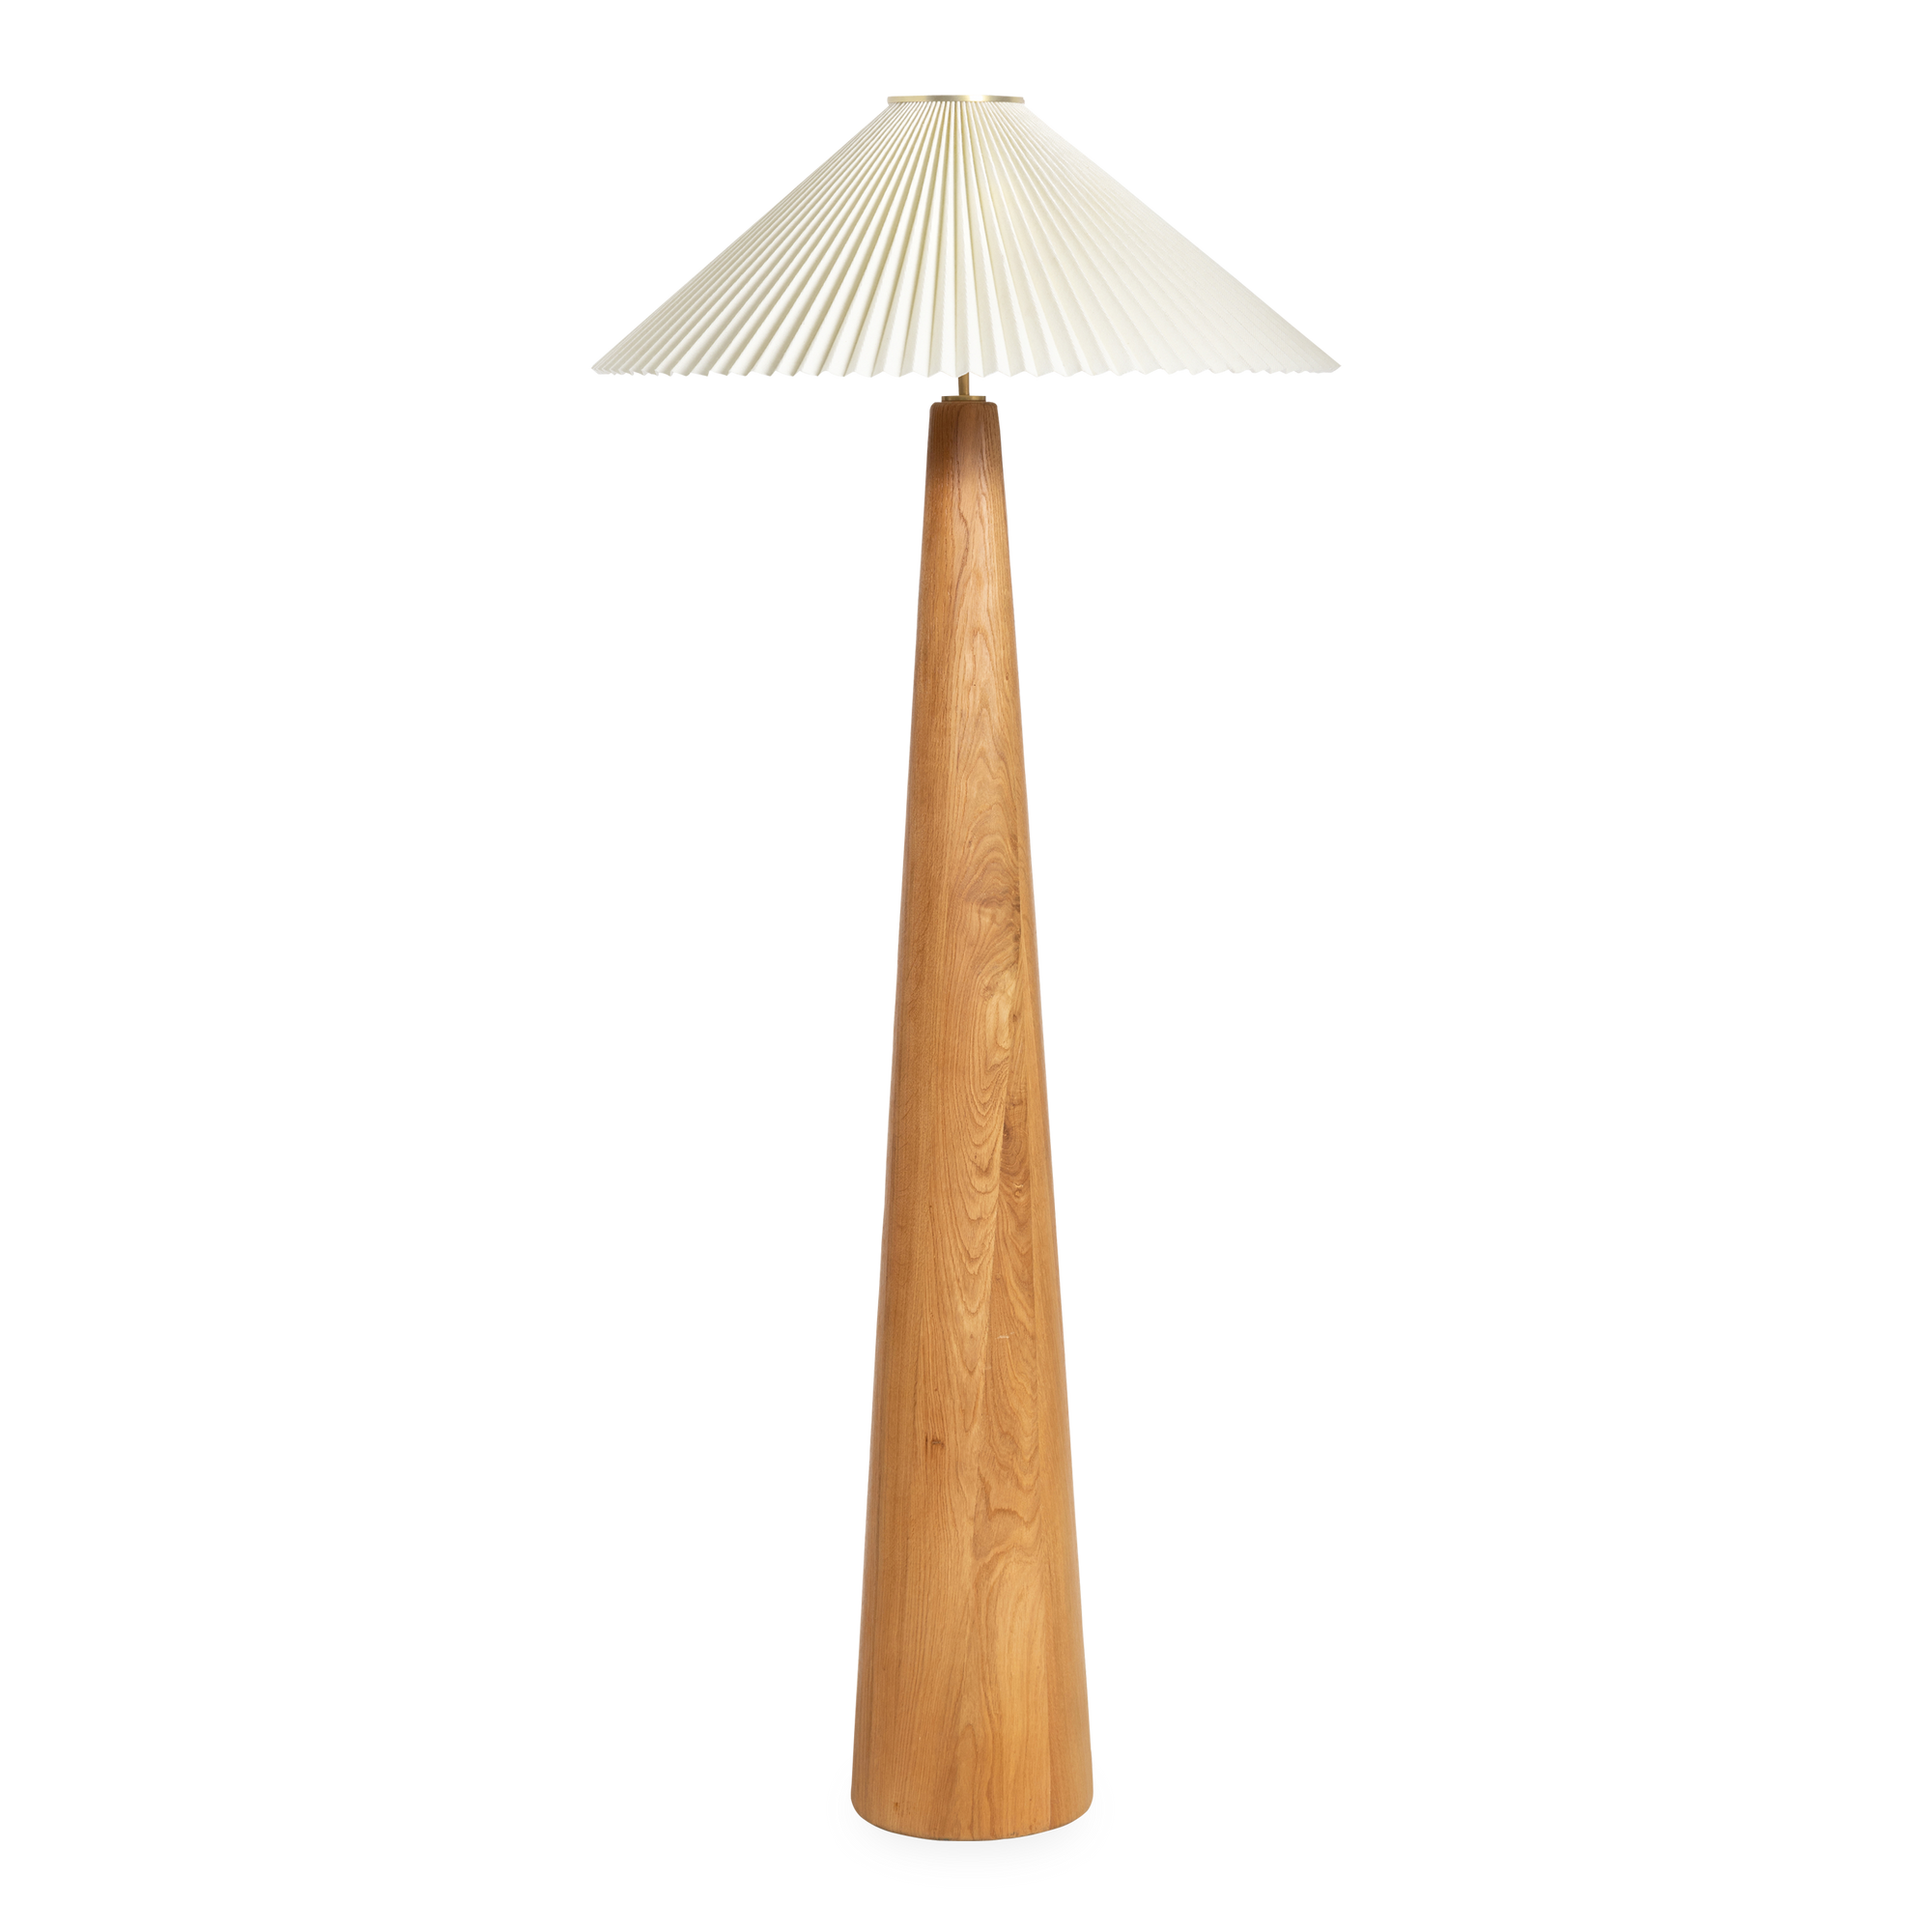 The Nora Floor Lamp gives off a vintage vibe with its folded shade and long wooden stand.